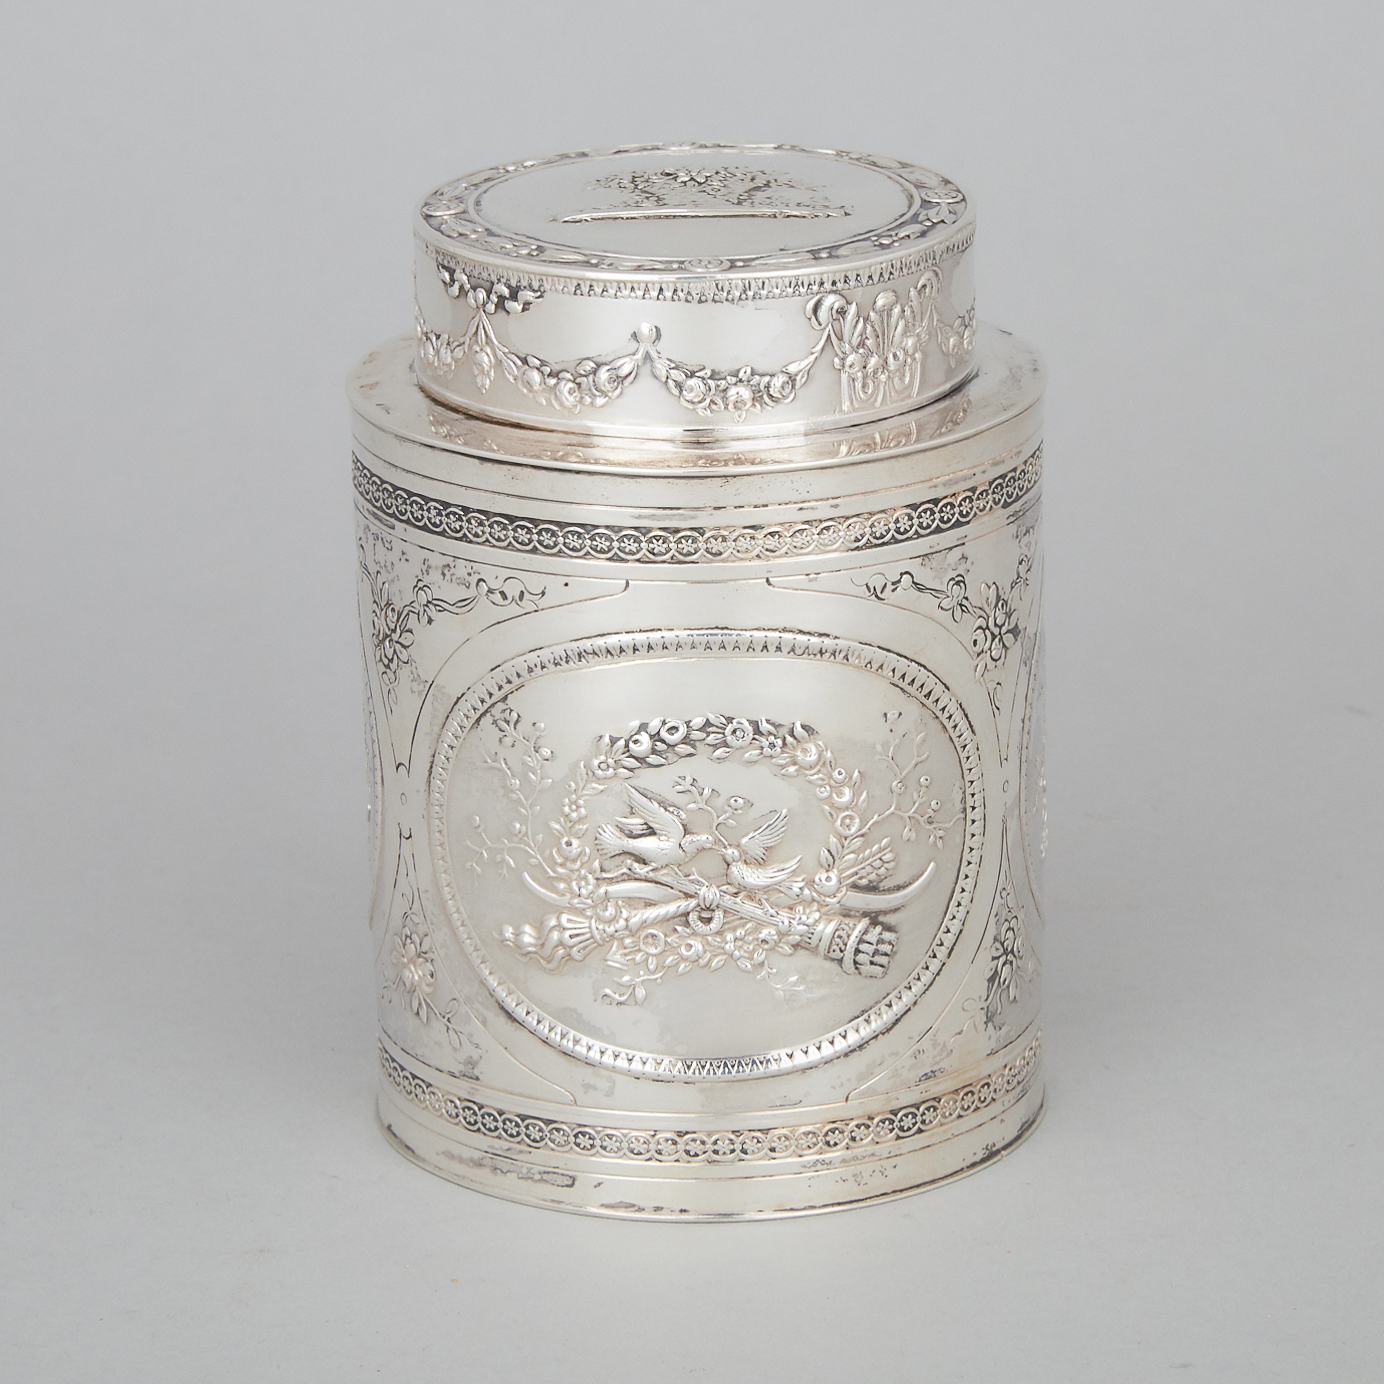 Continental Silver Tea Caddy, probably German, early 20th century